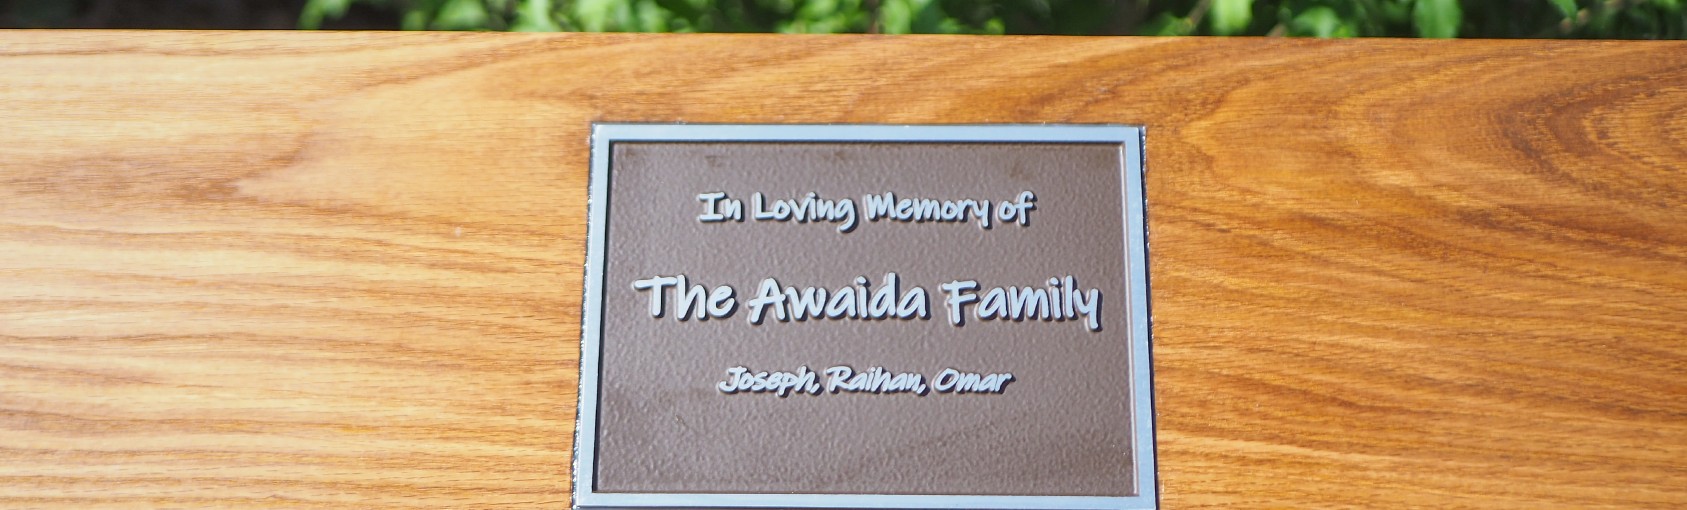 Remembering the Awaida Family - Benches at the IPCDC in Memoriam